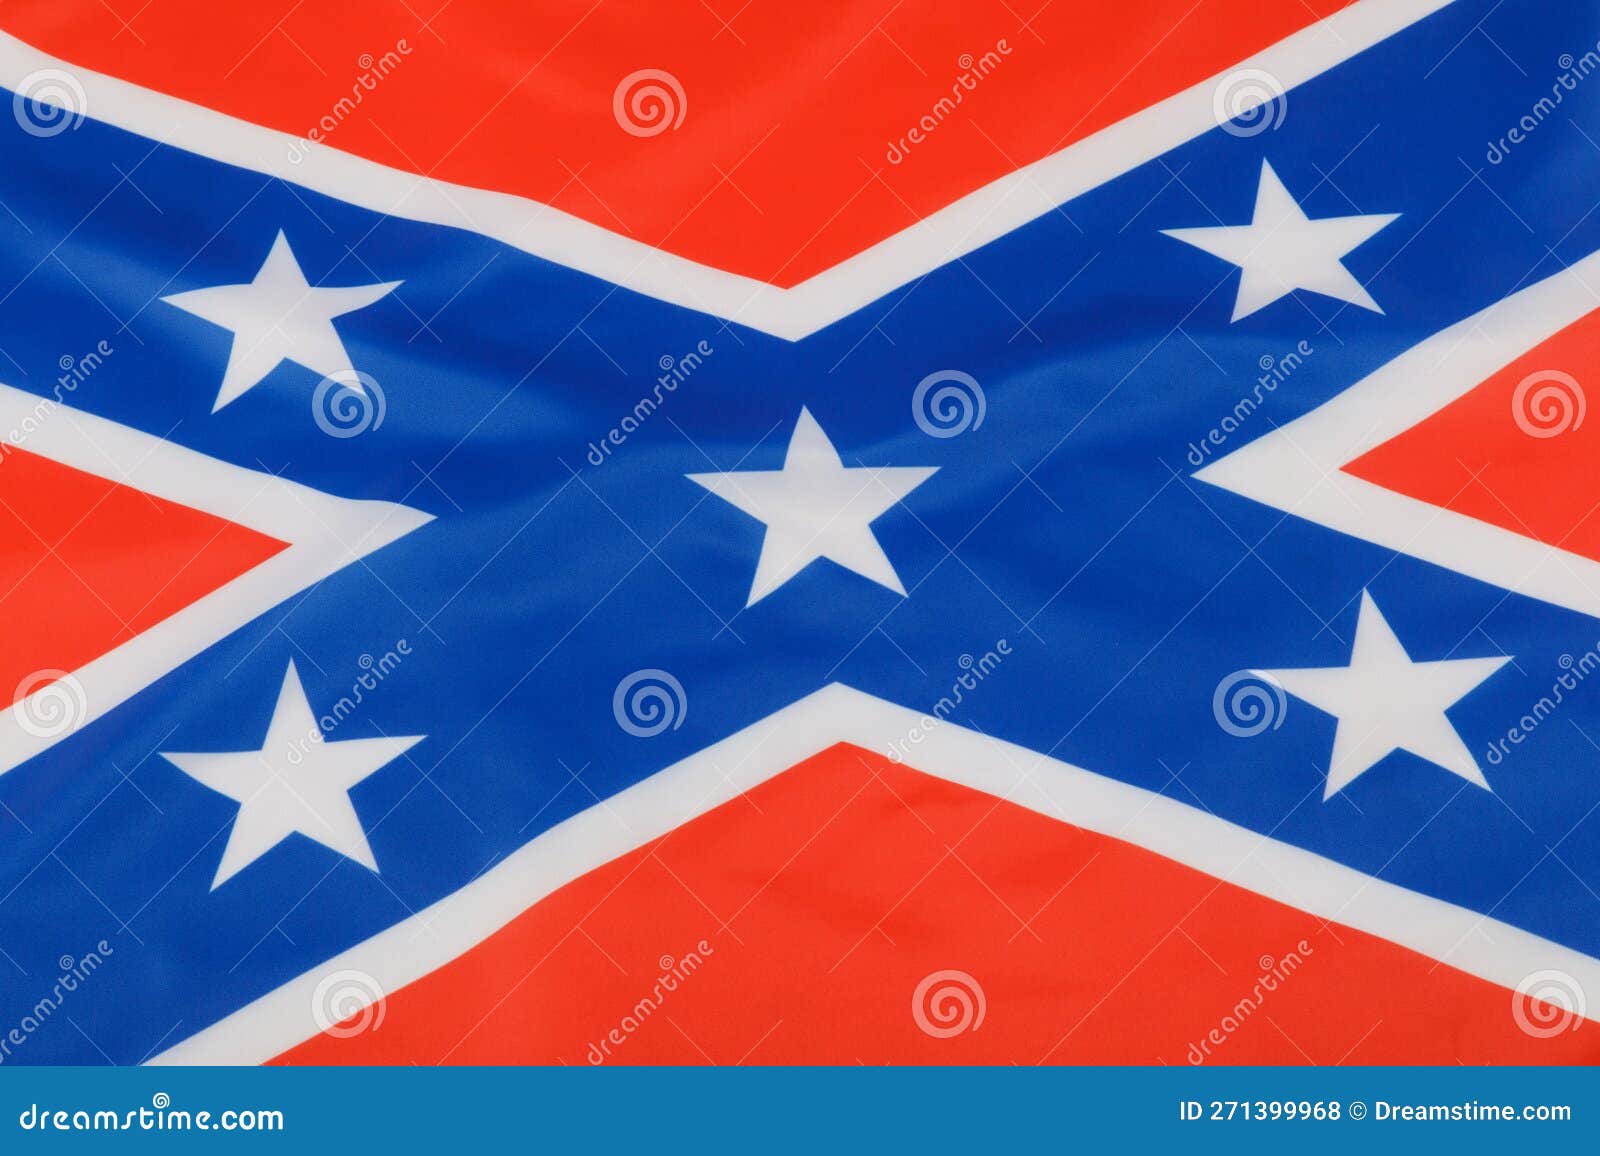 The Official Flag of the Confederate States of America Stock Photo ...